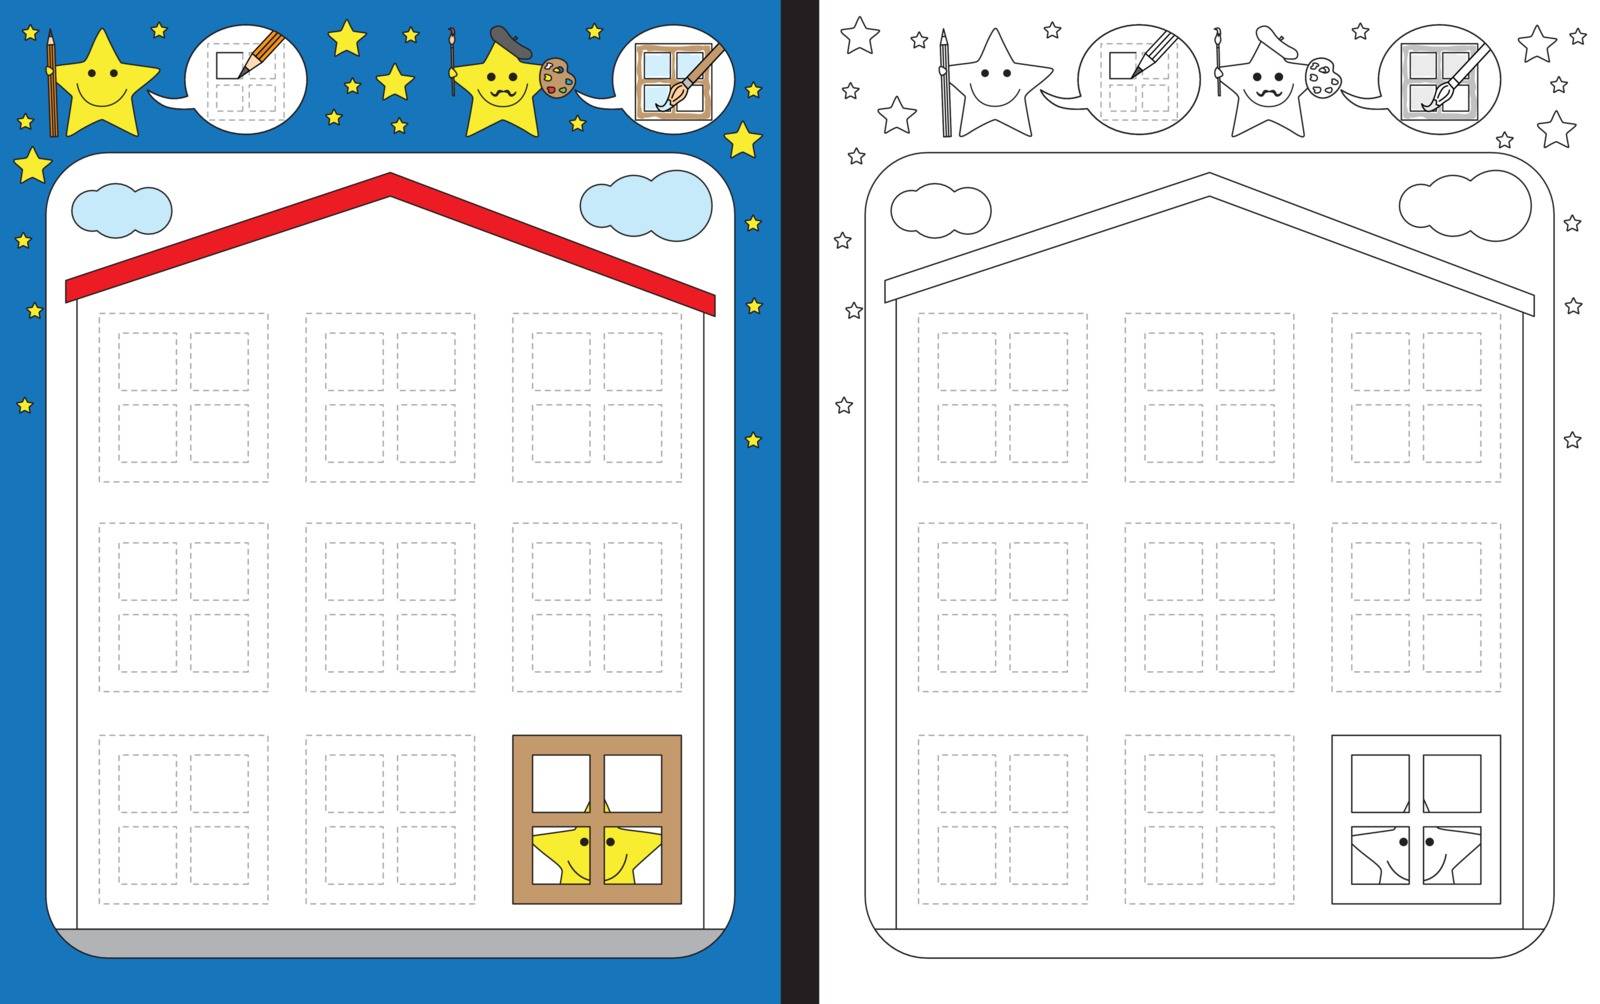 Preschool worksheet for practicing fine motor skills - tracing dashed lines of windows on a house